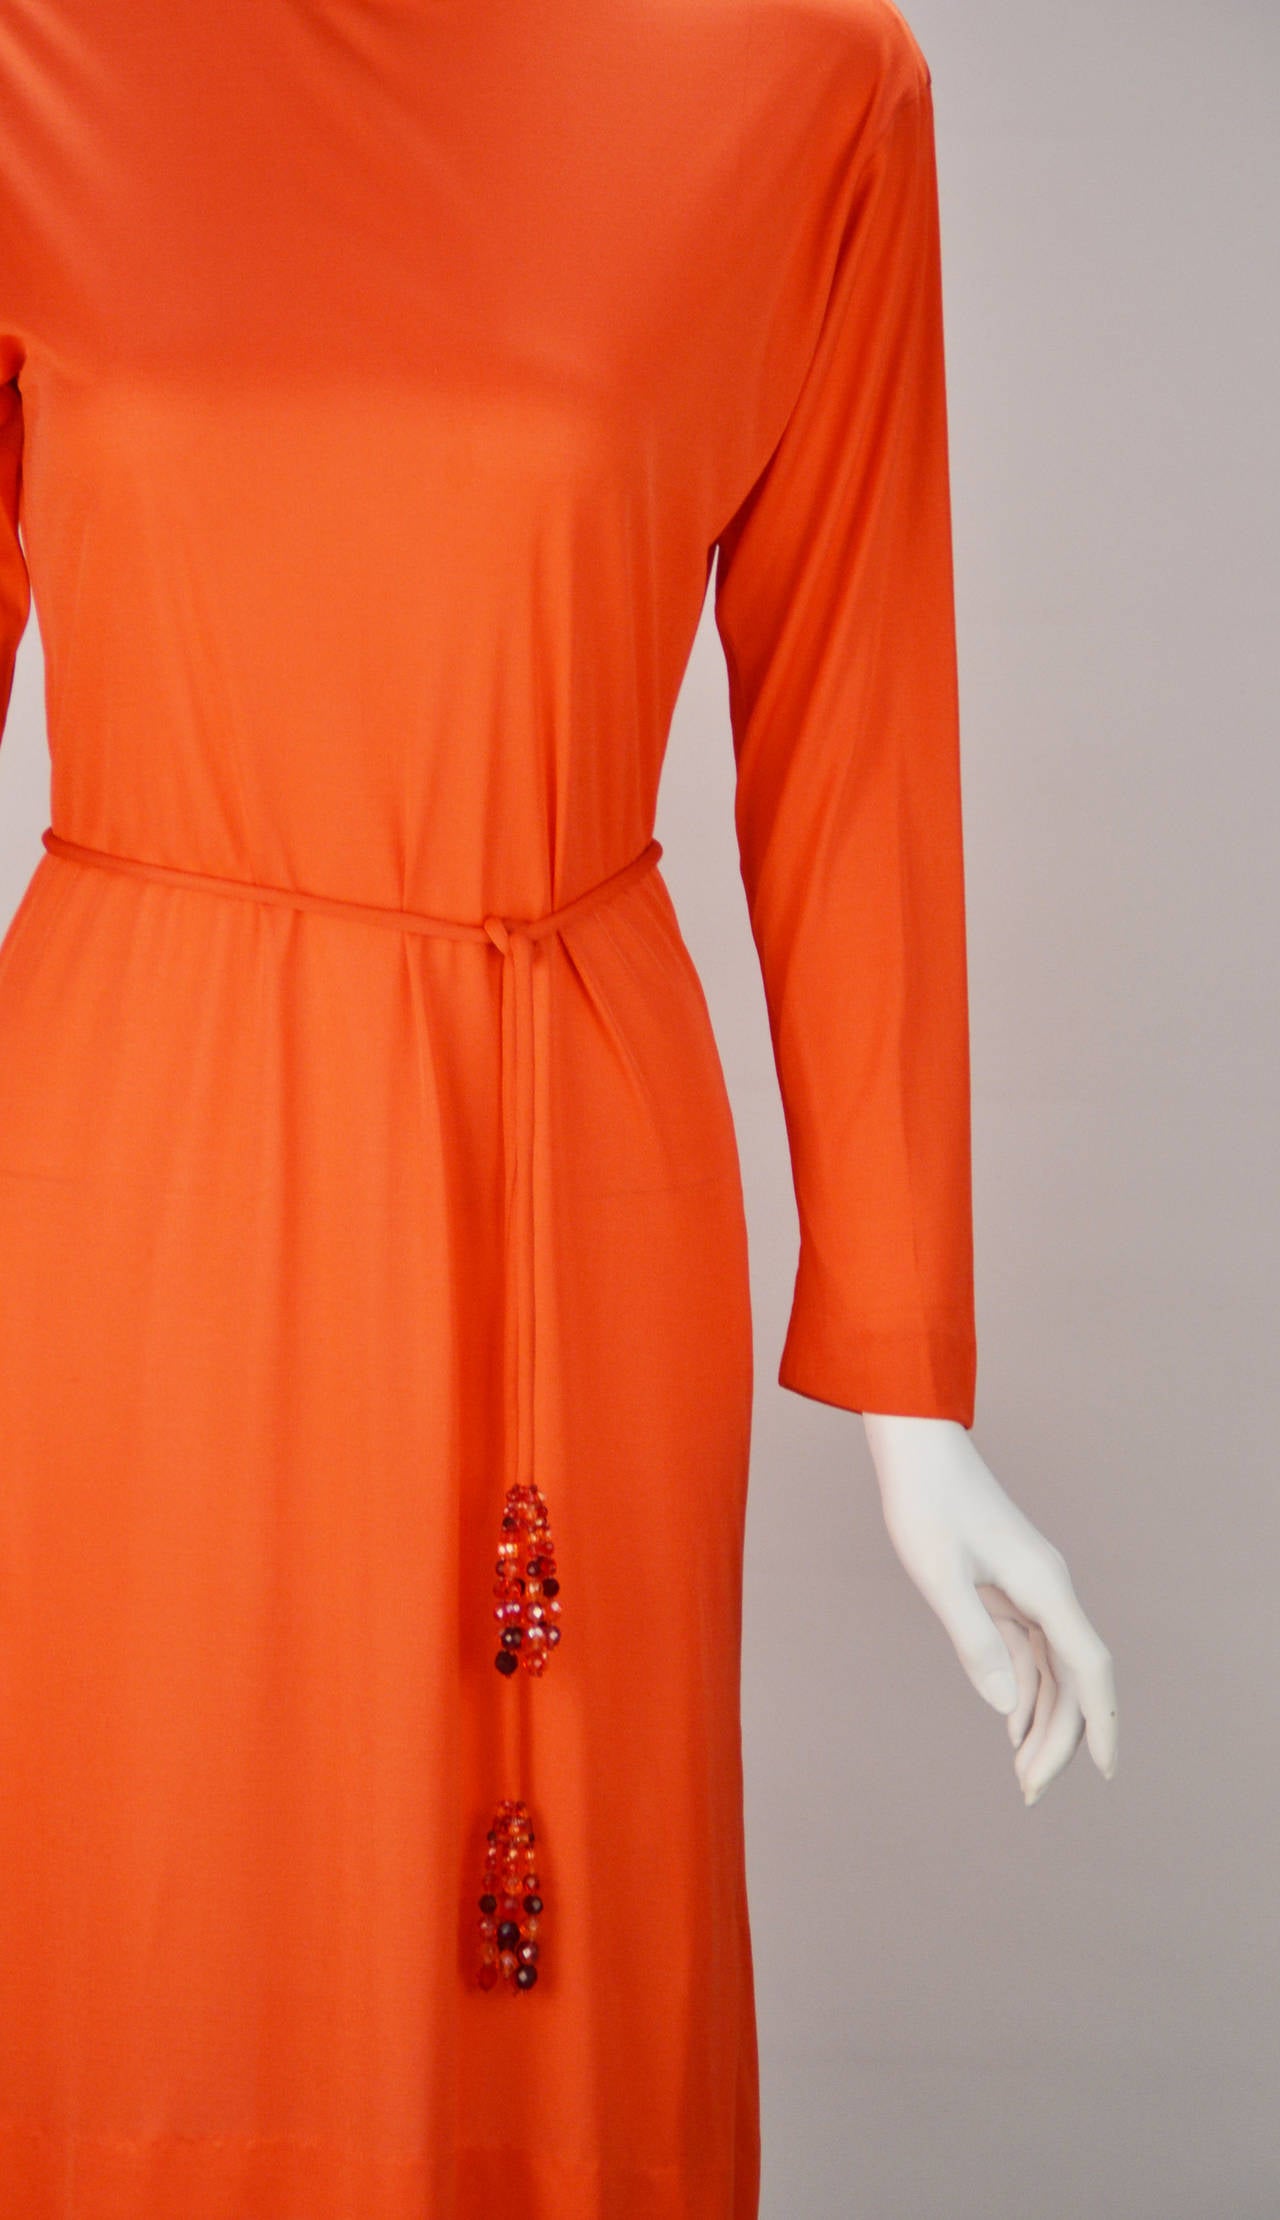 Red 1960s Pucci Coral Silk Knit Dress and Coppola e Toppo Belt